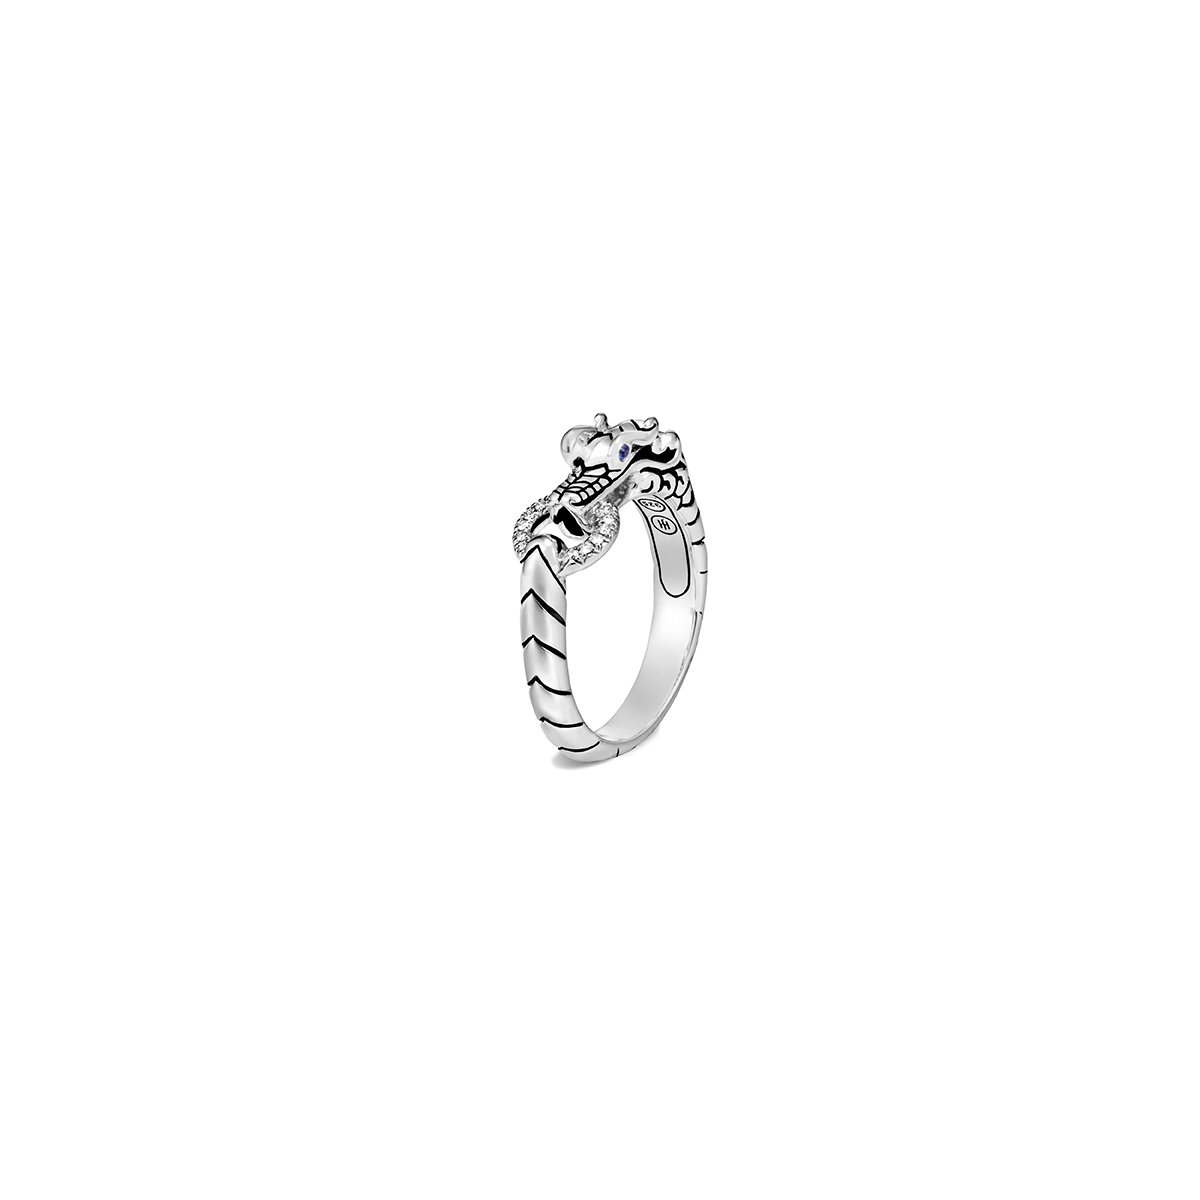 John Hardy Legends Sterling Silver Naga Ring with Diamonds